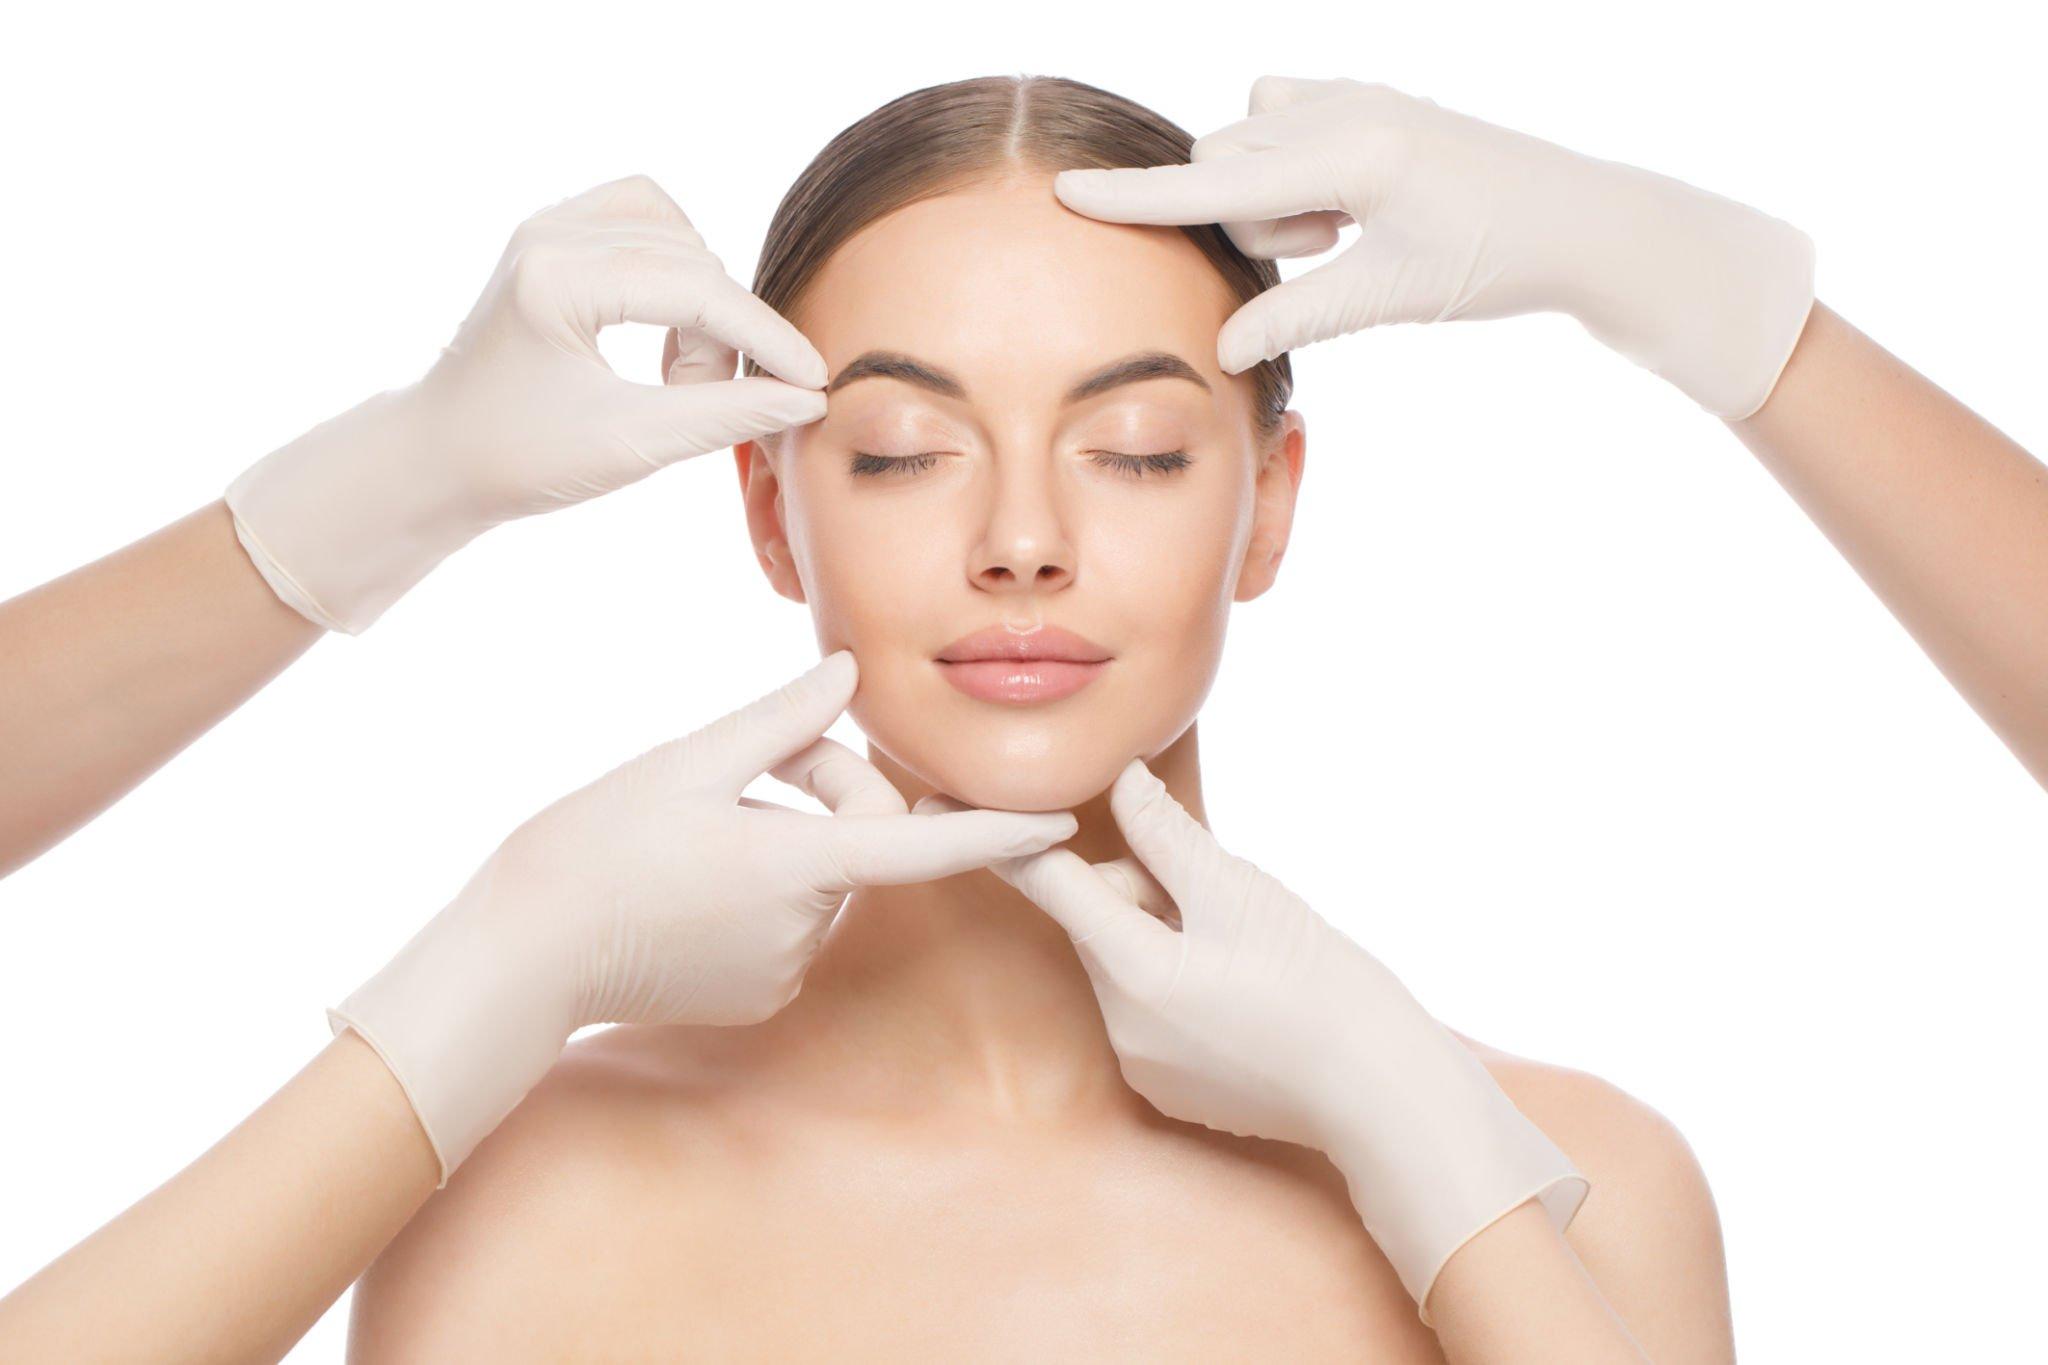 5 Great Reasons to Have a Cosmetic Surgery Procedure in Thailand